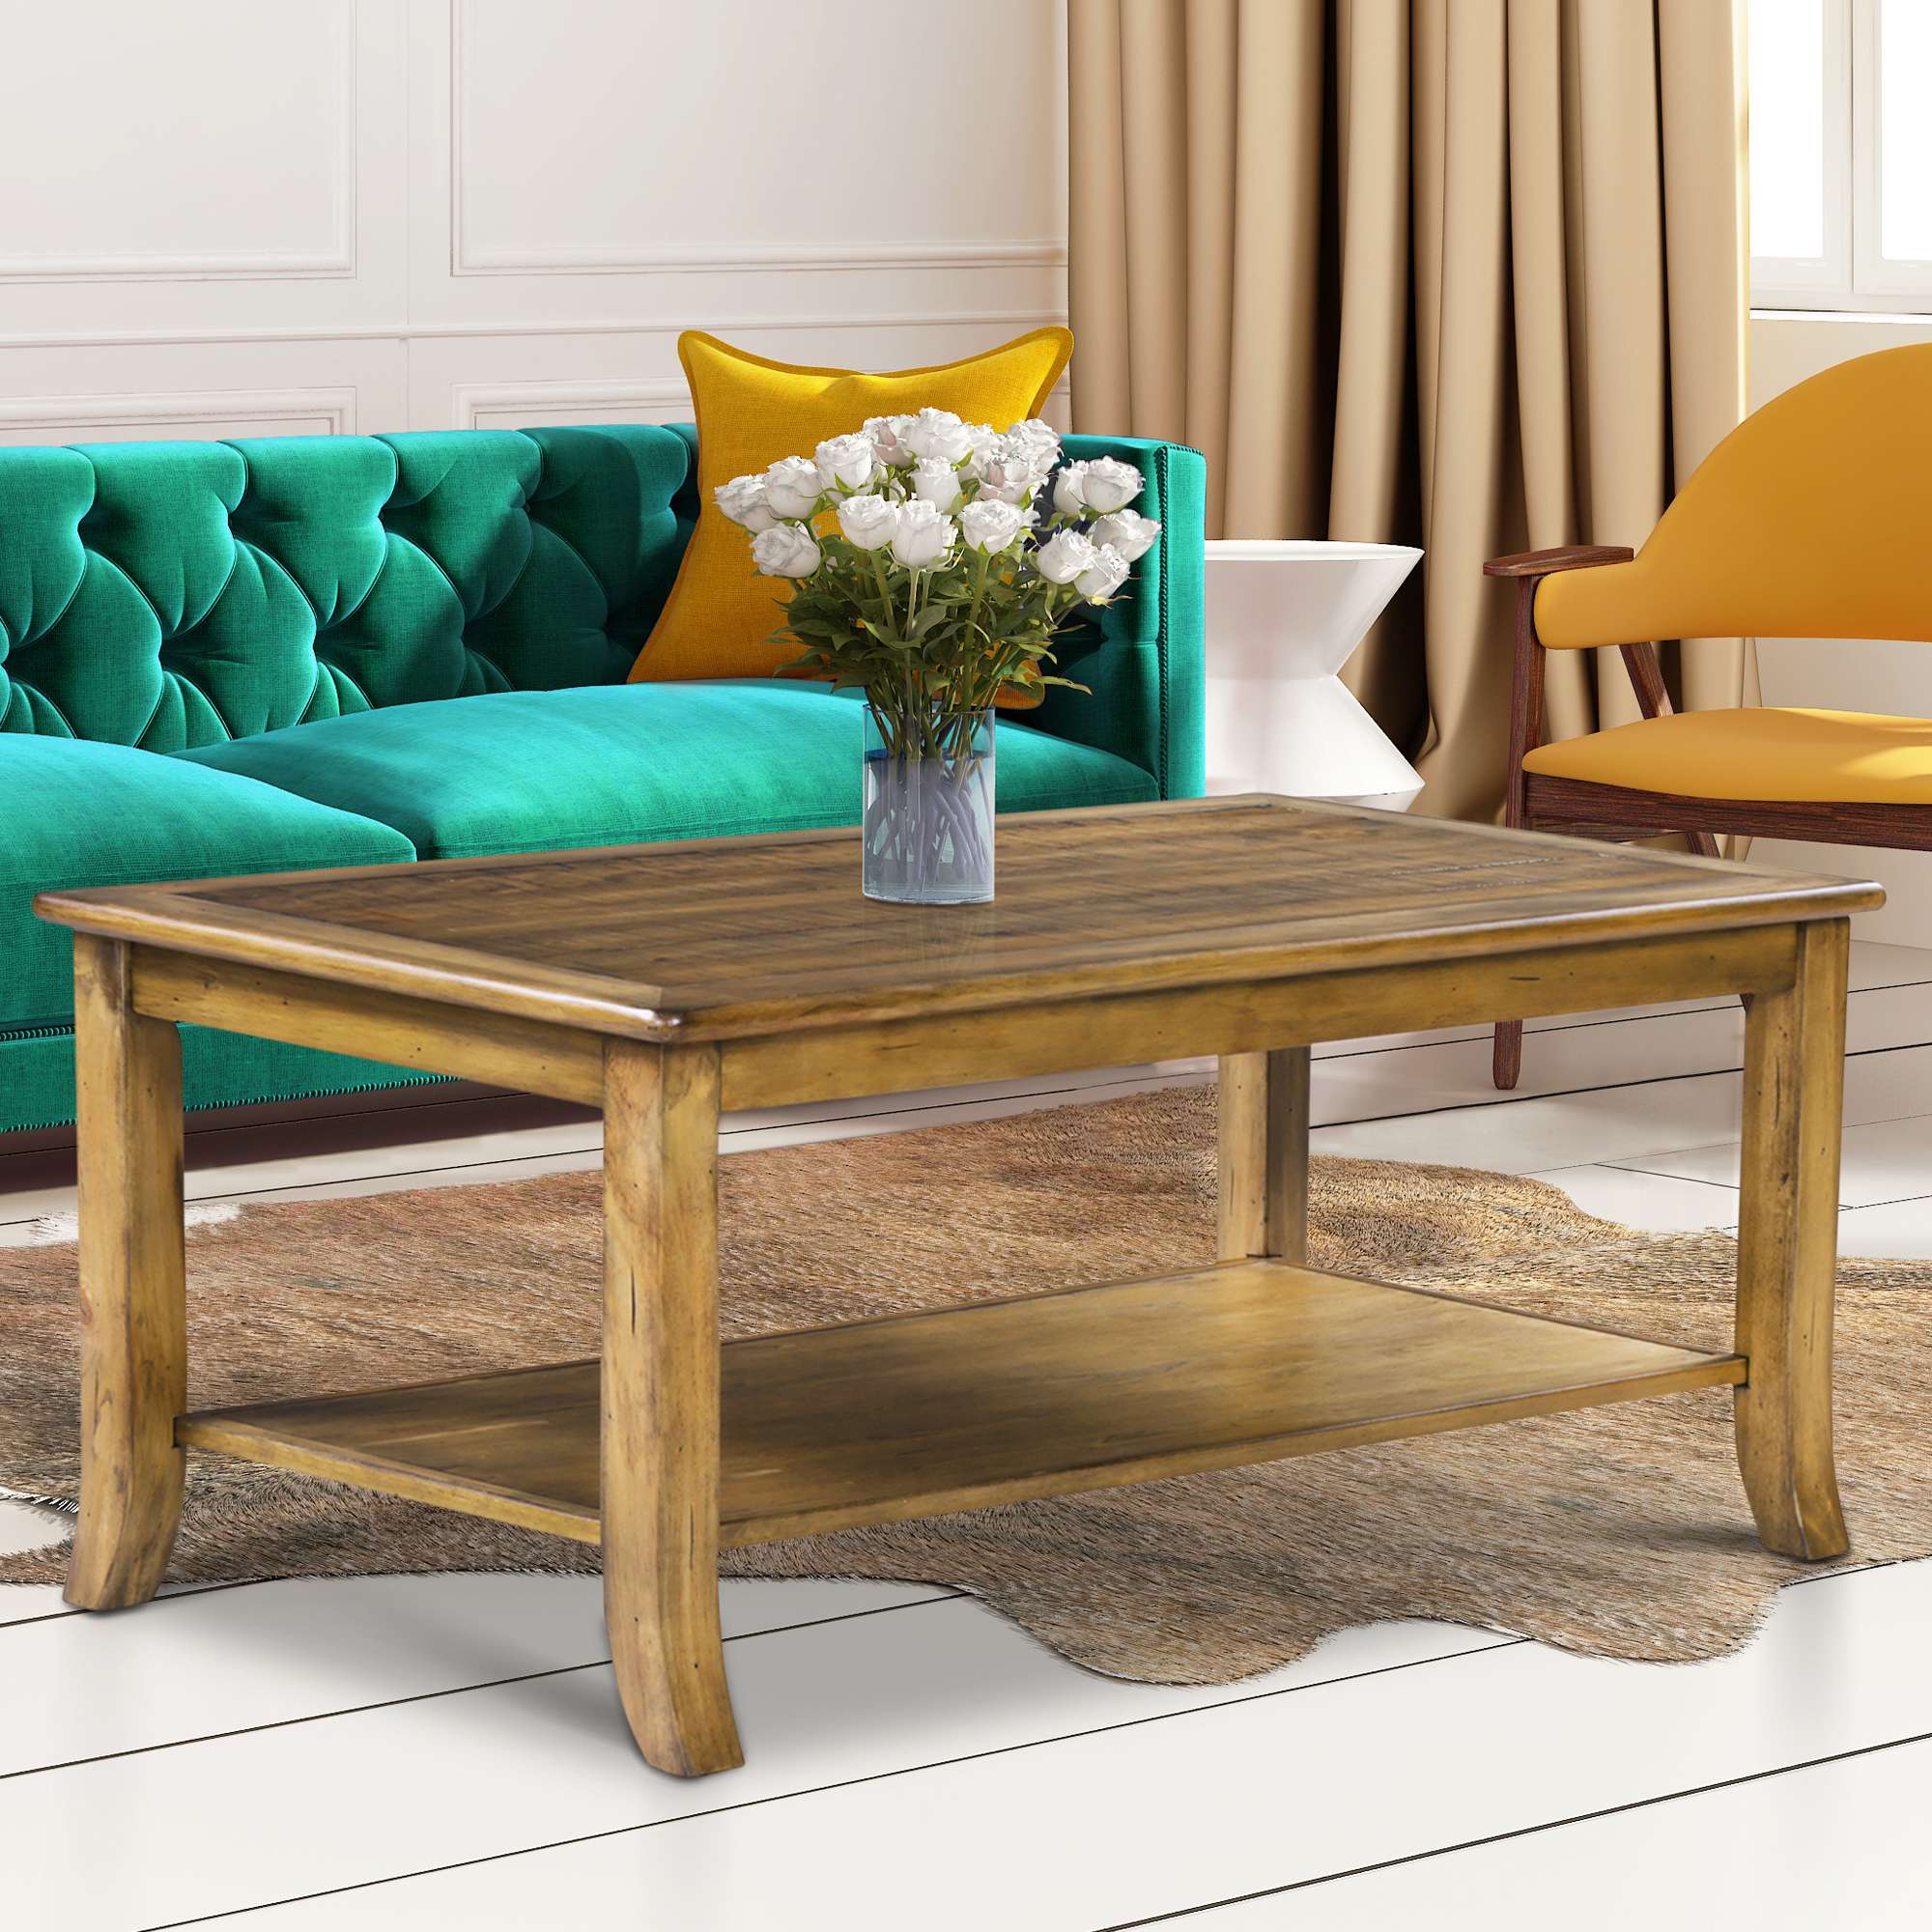 Granrest Cocktail Coffee Table, Rustic Maple Brown